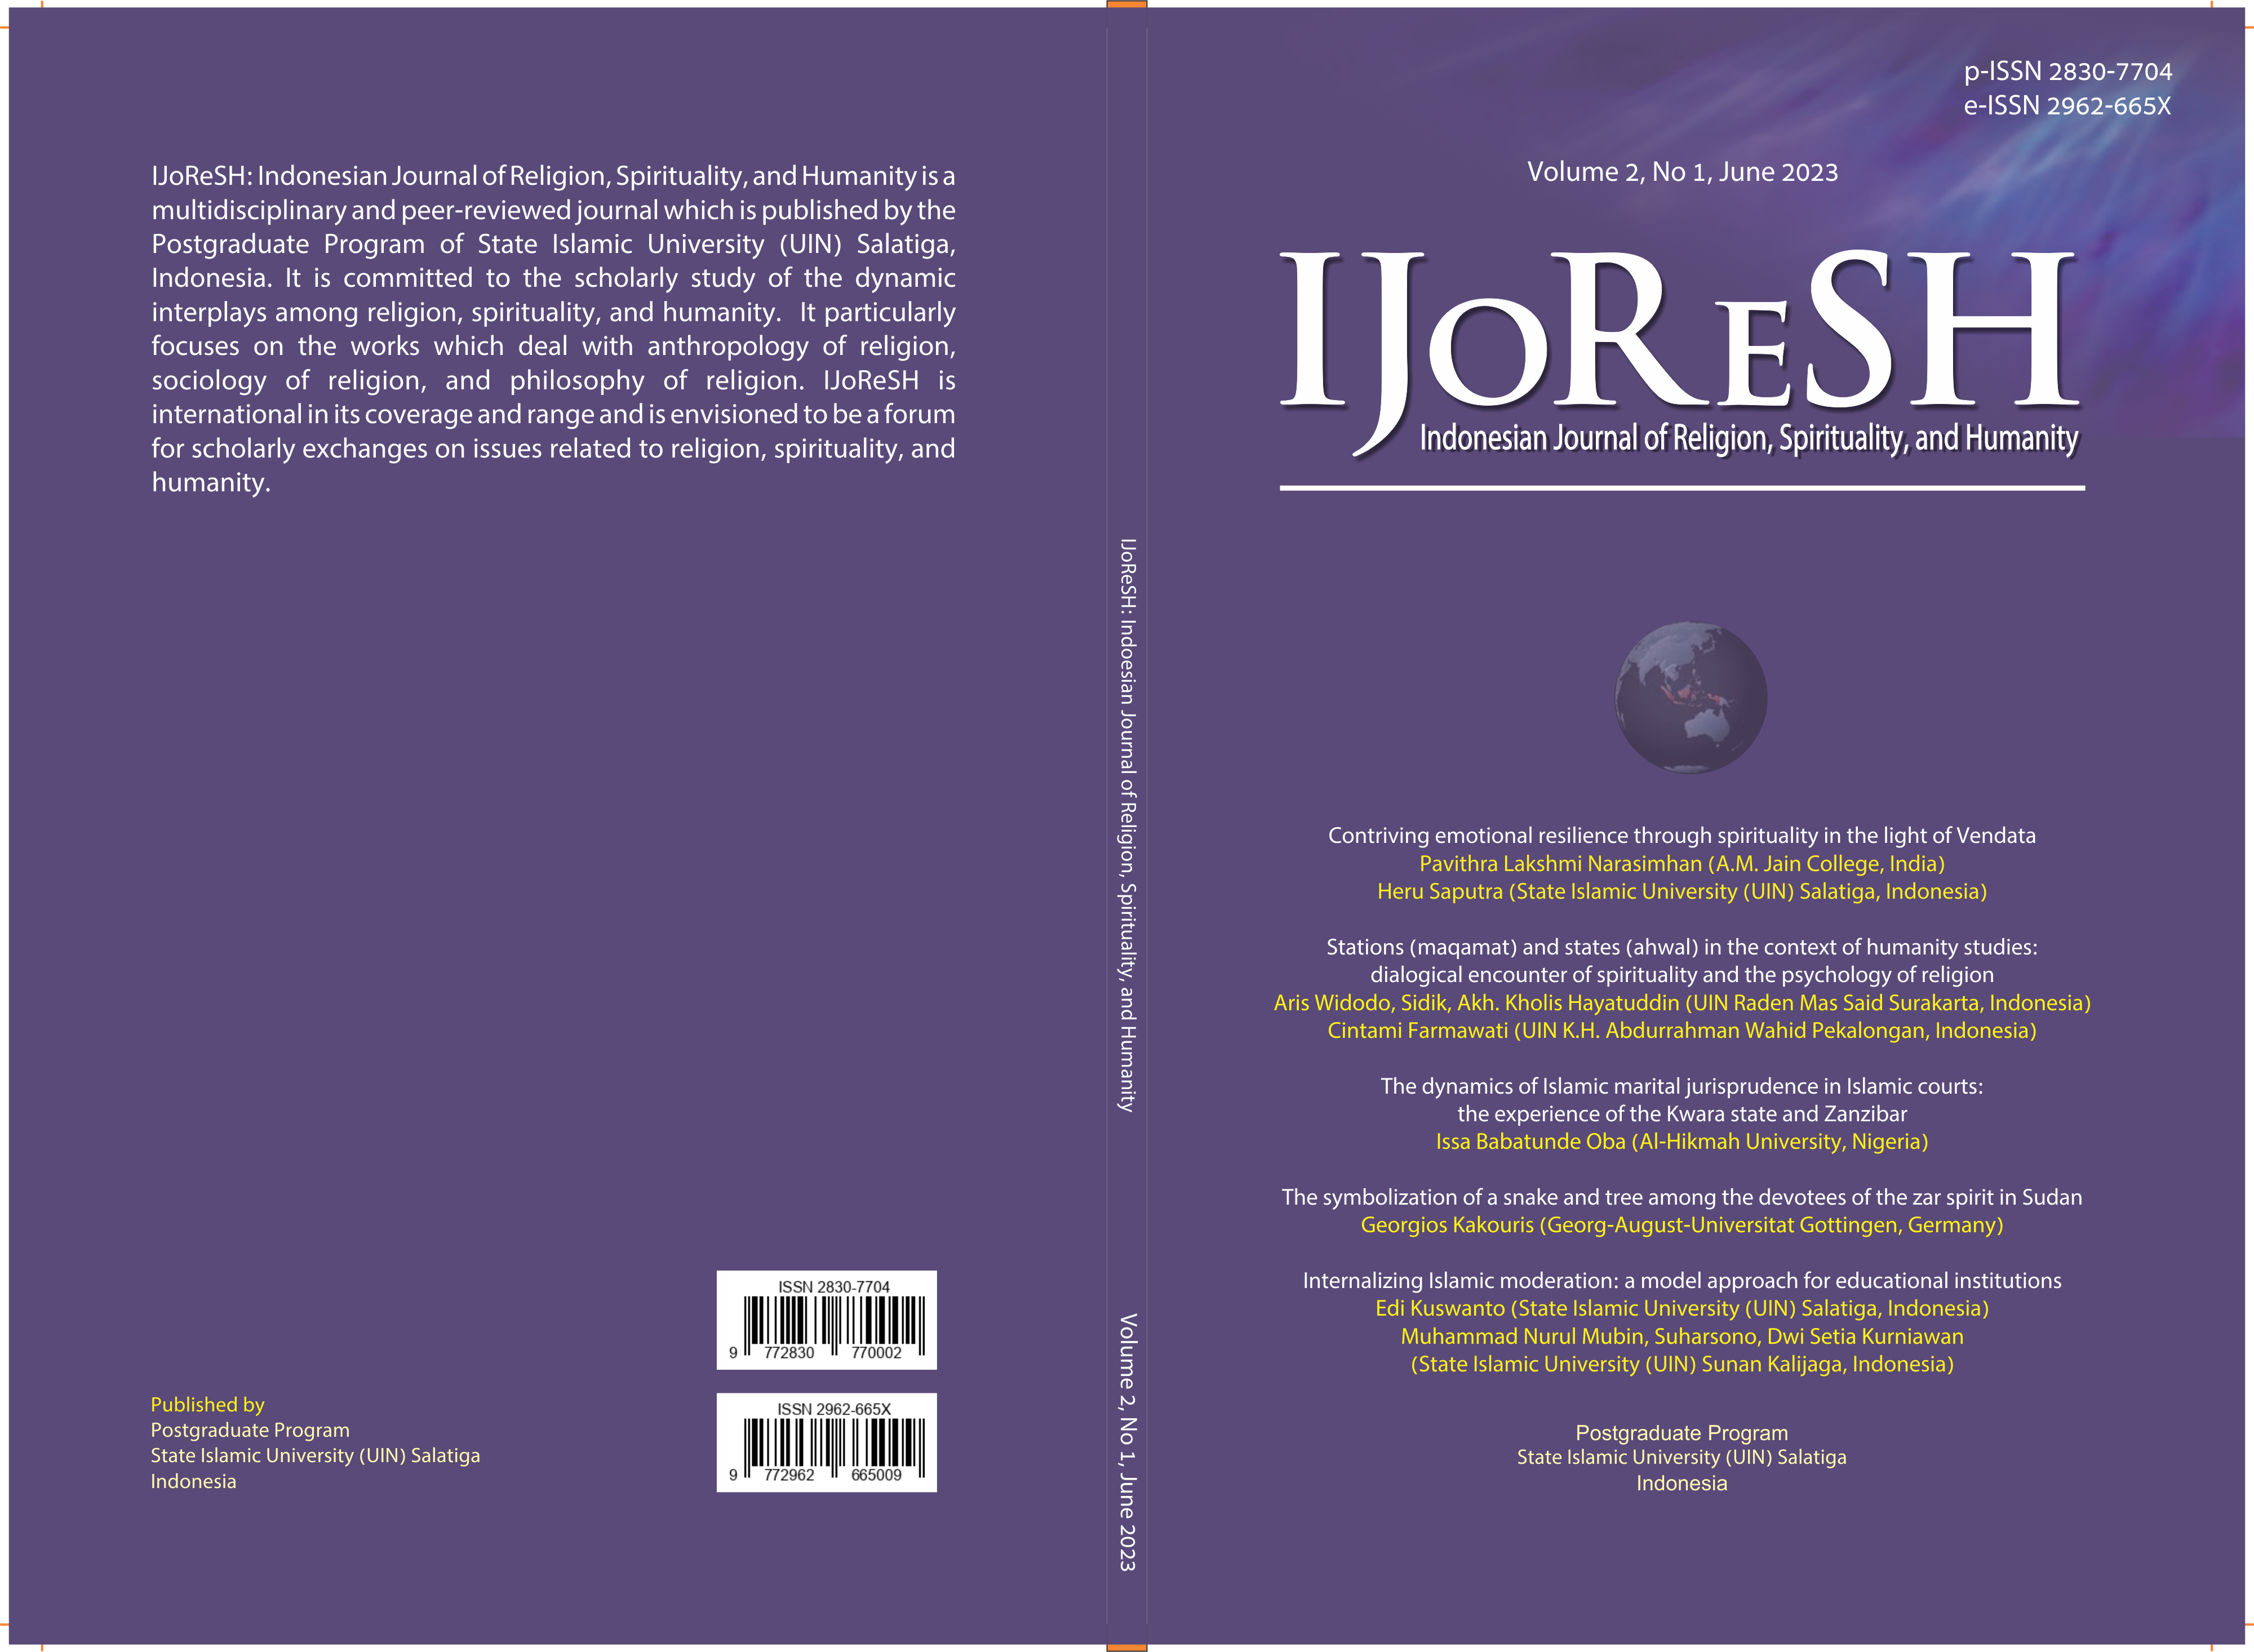 					View Vol. 2 No. 1 (2023): Indonesian Journal of Religion, Spirituality, and Humanity
				